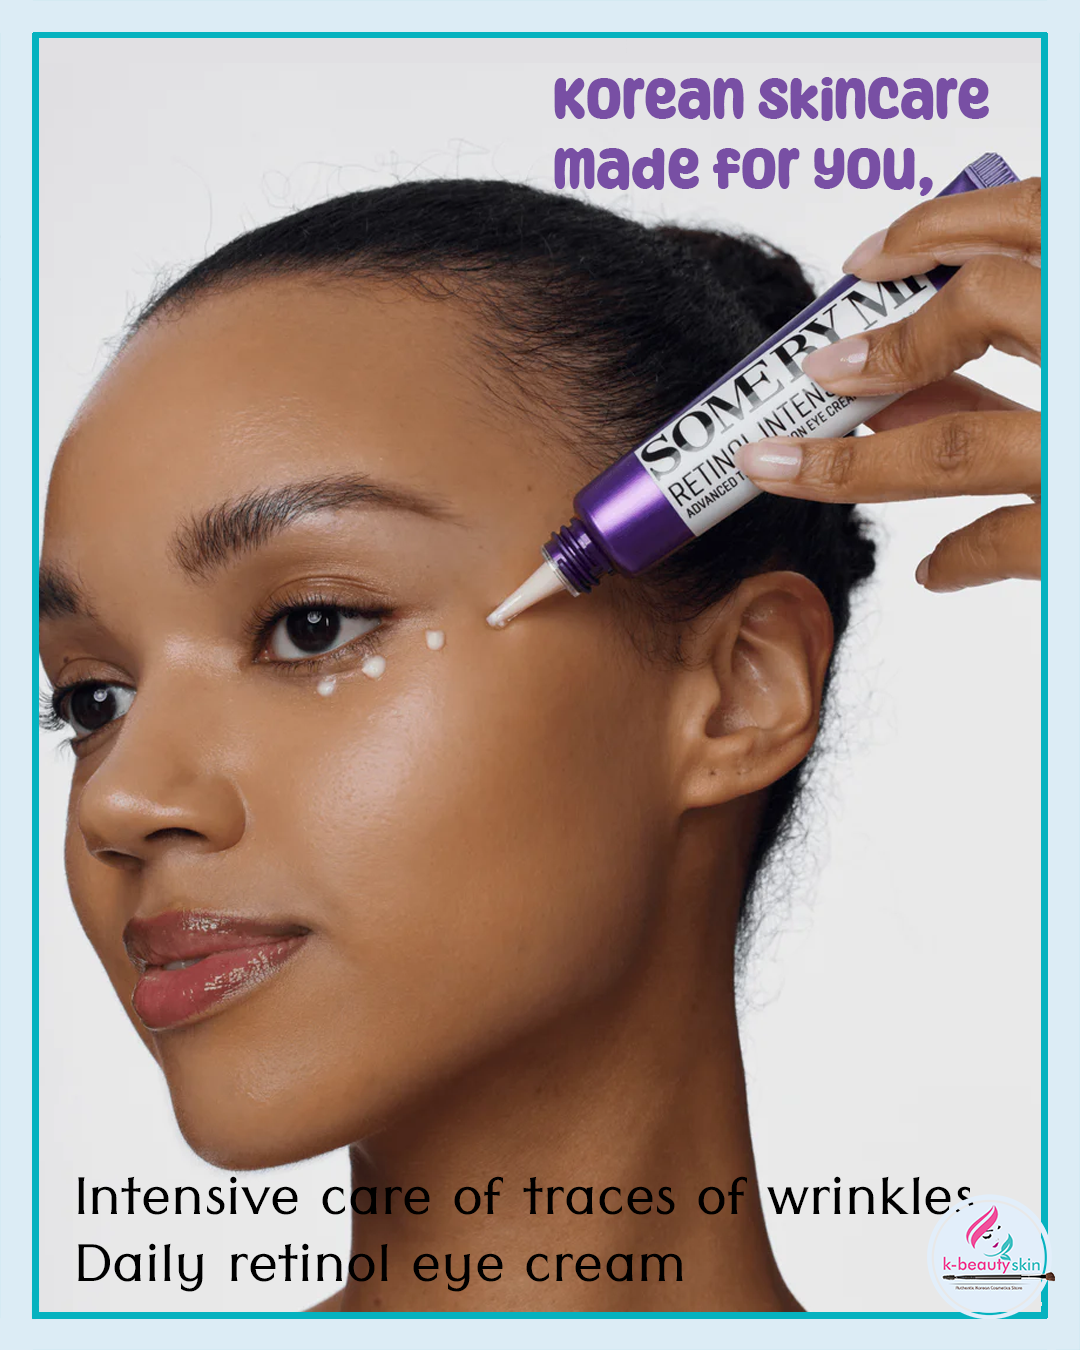 Wrinkle Reduction: Targets fine lines and wrinkles around the delicate eye area.